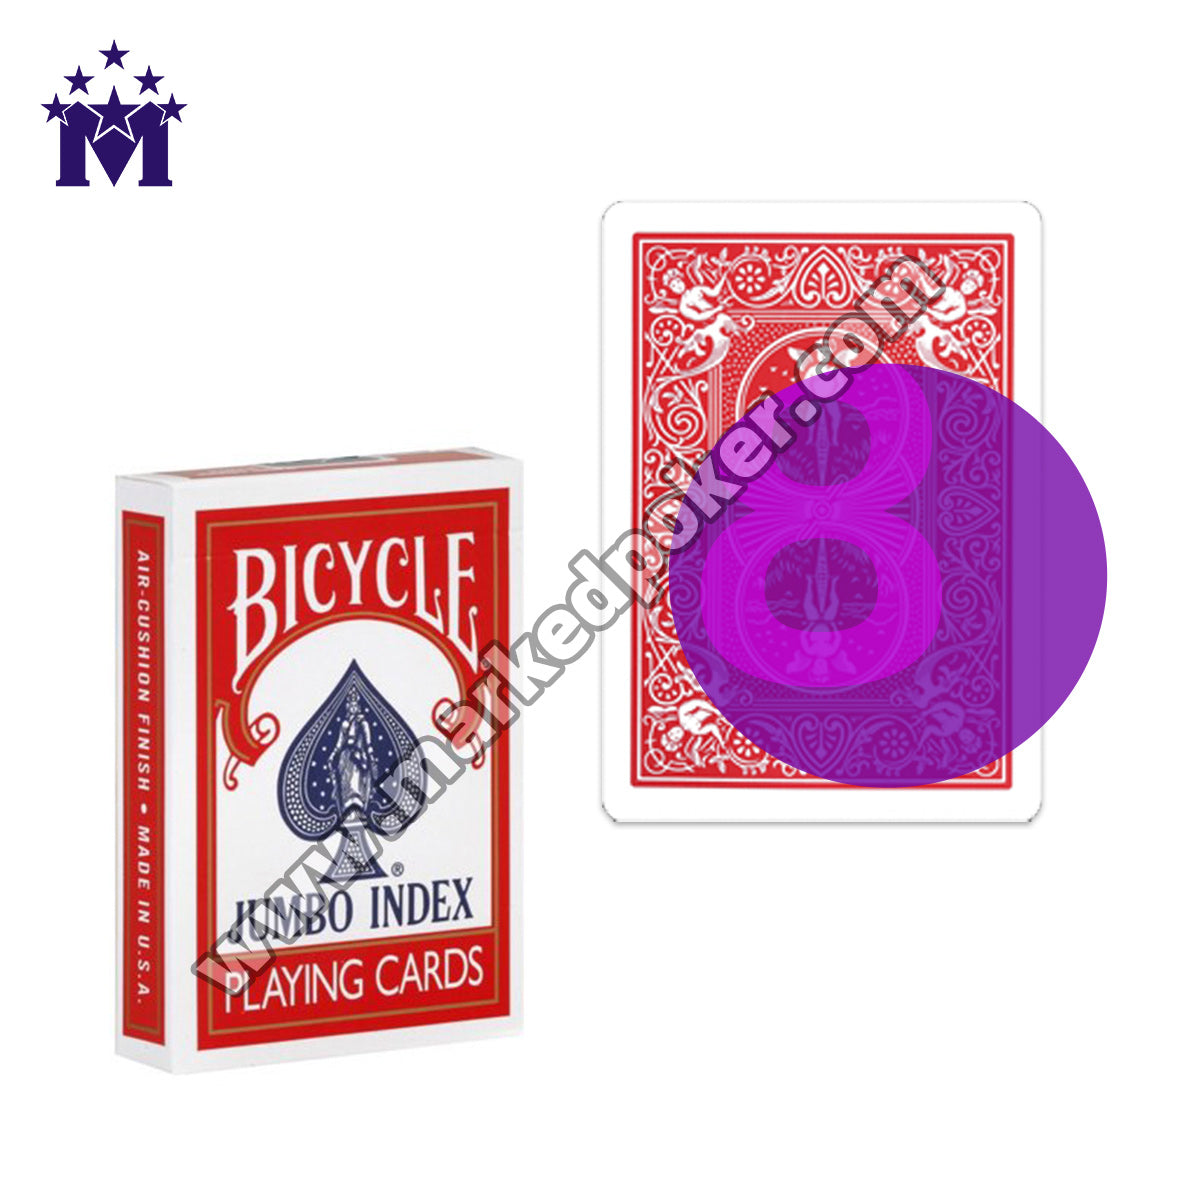 Bicycle Jumbo Index Infrared Marked Playing Cards